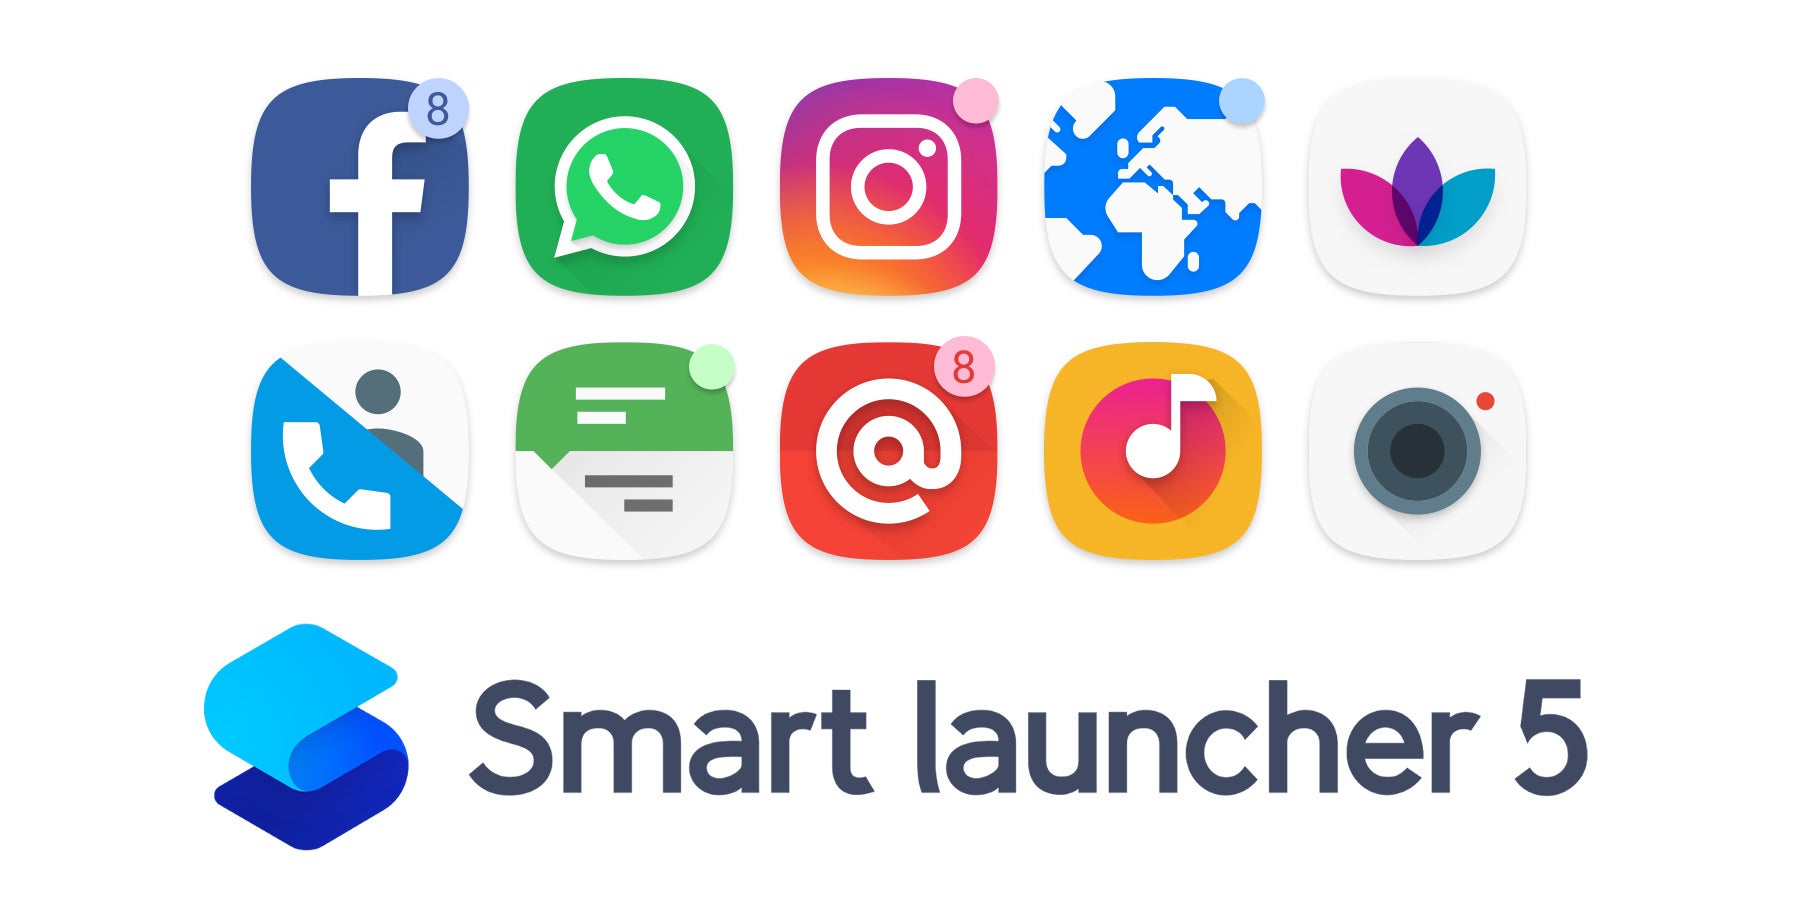 Smart Launcher gets completely overhauled with loads of new features